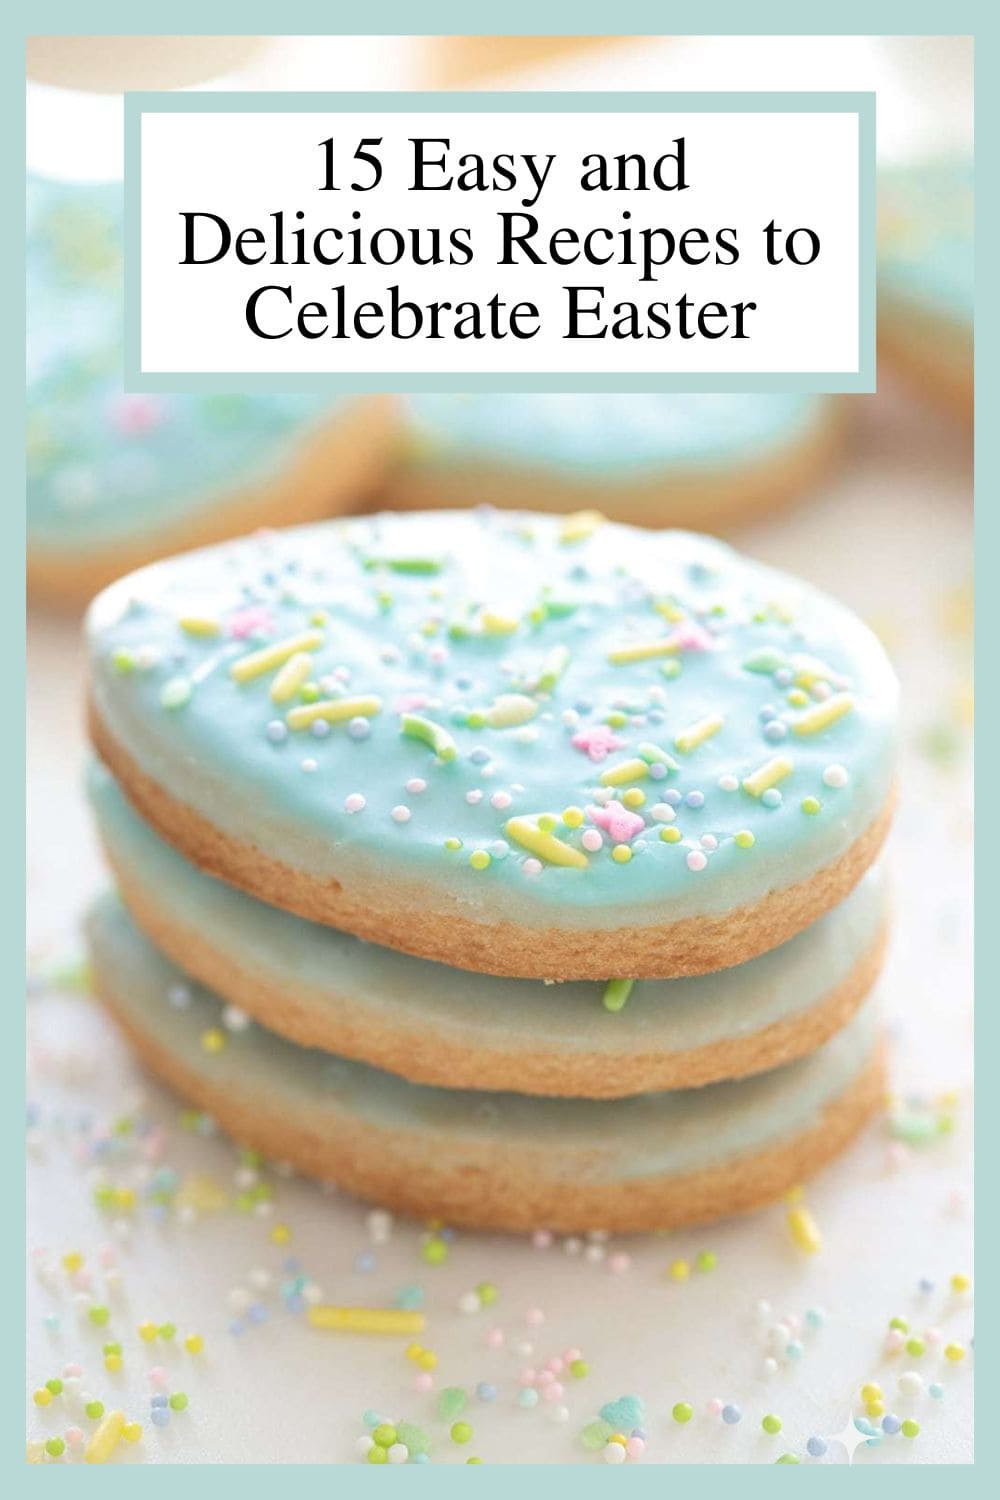 Celebrate Easter Deliciously, With Minimal Fuss! 15 Easy Spring Recipes